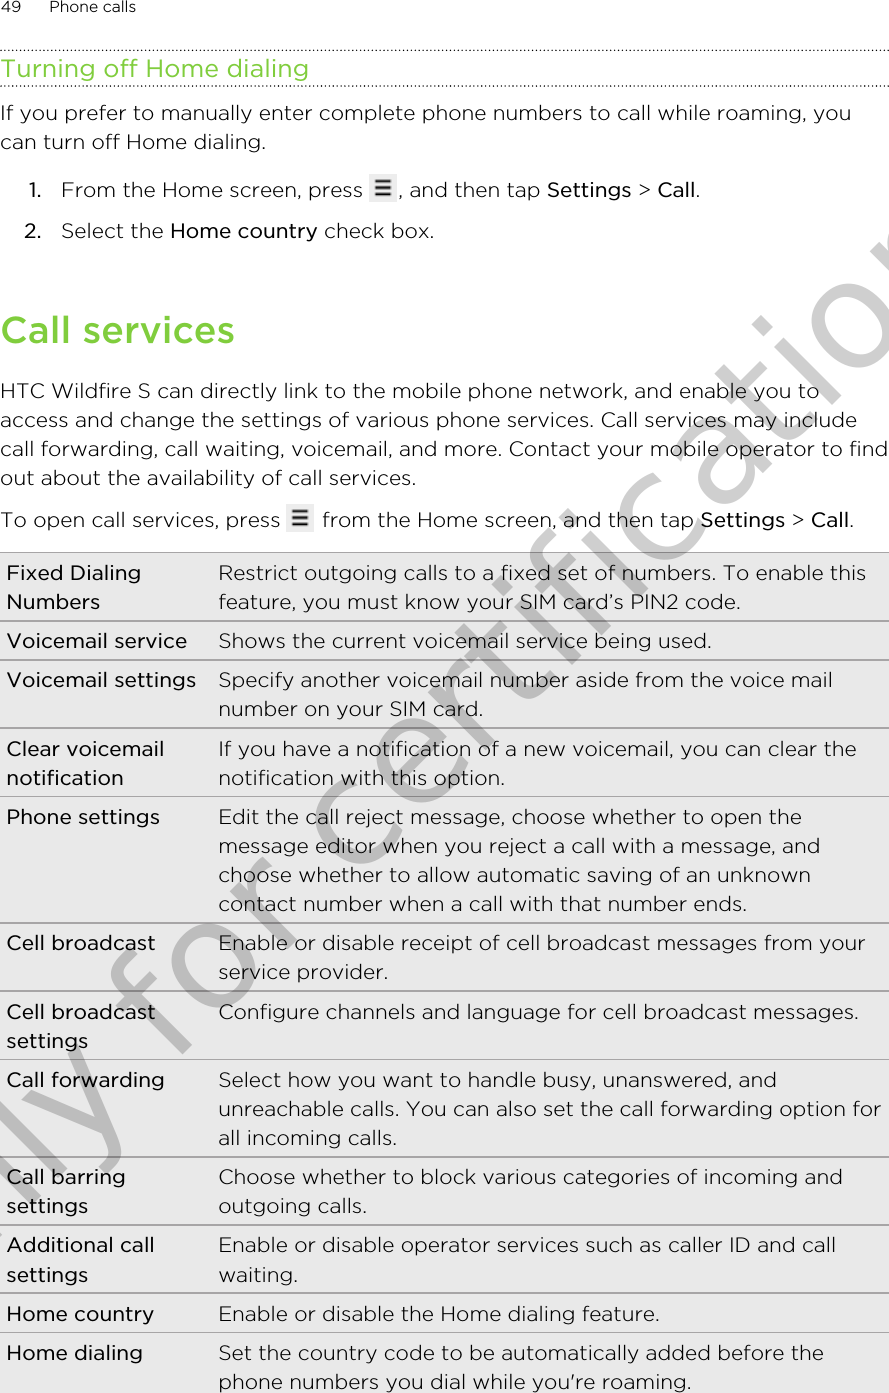 Turning off Home dialingIf you prefer to manually enter complete phone numbers to call while roaming, youcan turn off Home dialing.1. From the Home screen, press  , and then tap Settings &gt; Call.2. Select the Home country check box.Call servicesHTC Wildfire S can directly link to the mobile phone network, and enable you toaccess and change the settings of various phone services. Call services may includecall forwarding, call waiting, voicemail, and more. Contact your mobile operator to findout about the availability of call services.To open call services, press   from the Home screen, and then tap Settings &gt; Call.Fixed DialingNumbersRestrict outgoing calls to a fixed set of numbers. To enable thisfeature, you must know your SIM card’s PIN2 code.Voicemail service Shows the current voicemail service being used.Voicemail settings Specify another voicemail number aside from the voice mailnumber on your SIM card.Clear voicemailnotificationIf you have a notification of a new voicemail, you can clear thenotification with this option.Phone settings Edit the call reject message, choose whether to open themessage editor when you reject a call with a message, andchoose whether to allow automatic saving of an unknowncontact number when a call with that number ends.Cell broadcast Enable or disable receipt of cell broadcast messages from yourservice provider.Cell broadcastsettingsConfigure channels and language for cell broadcast messages.Call forwarding Select how you want to handle busy, unanswered, andunreachable calls. You can also set the call forwarding option forall incoming calls.Call barringsettingsChoose whether to block various categories of incoming andoutgoing calls.Additional callsettingsEnable or disable operator services such as caller ID and callwaiting.Home country Enable or disable the Home dialing feature.Home dialing Set the country code to be automatically added before thephone numbers you dial while you&apos;re roaming.49 Phone callsOnly for certification